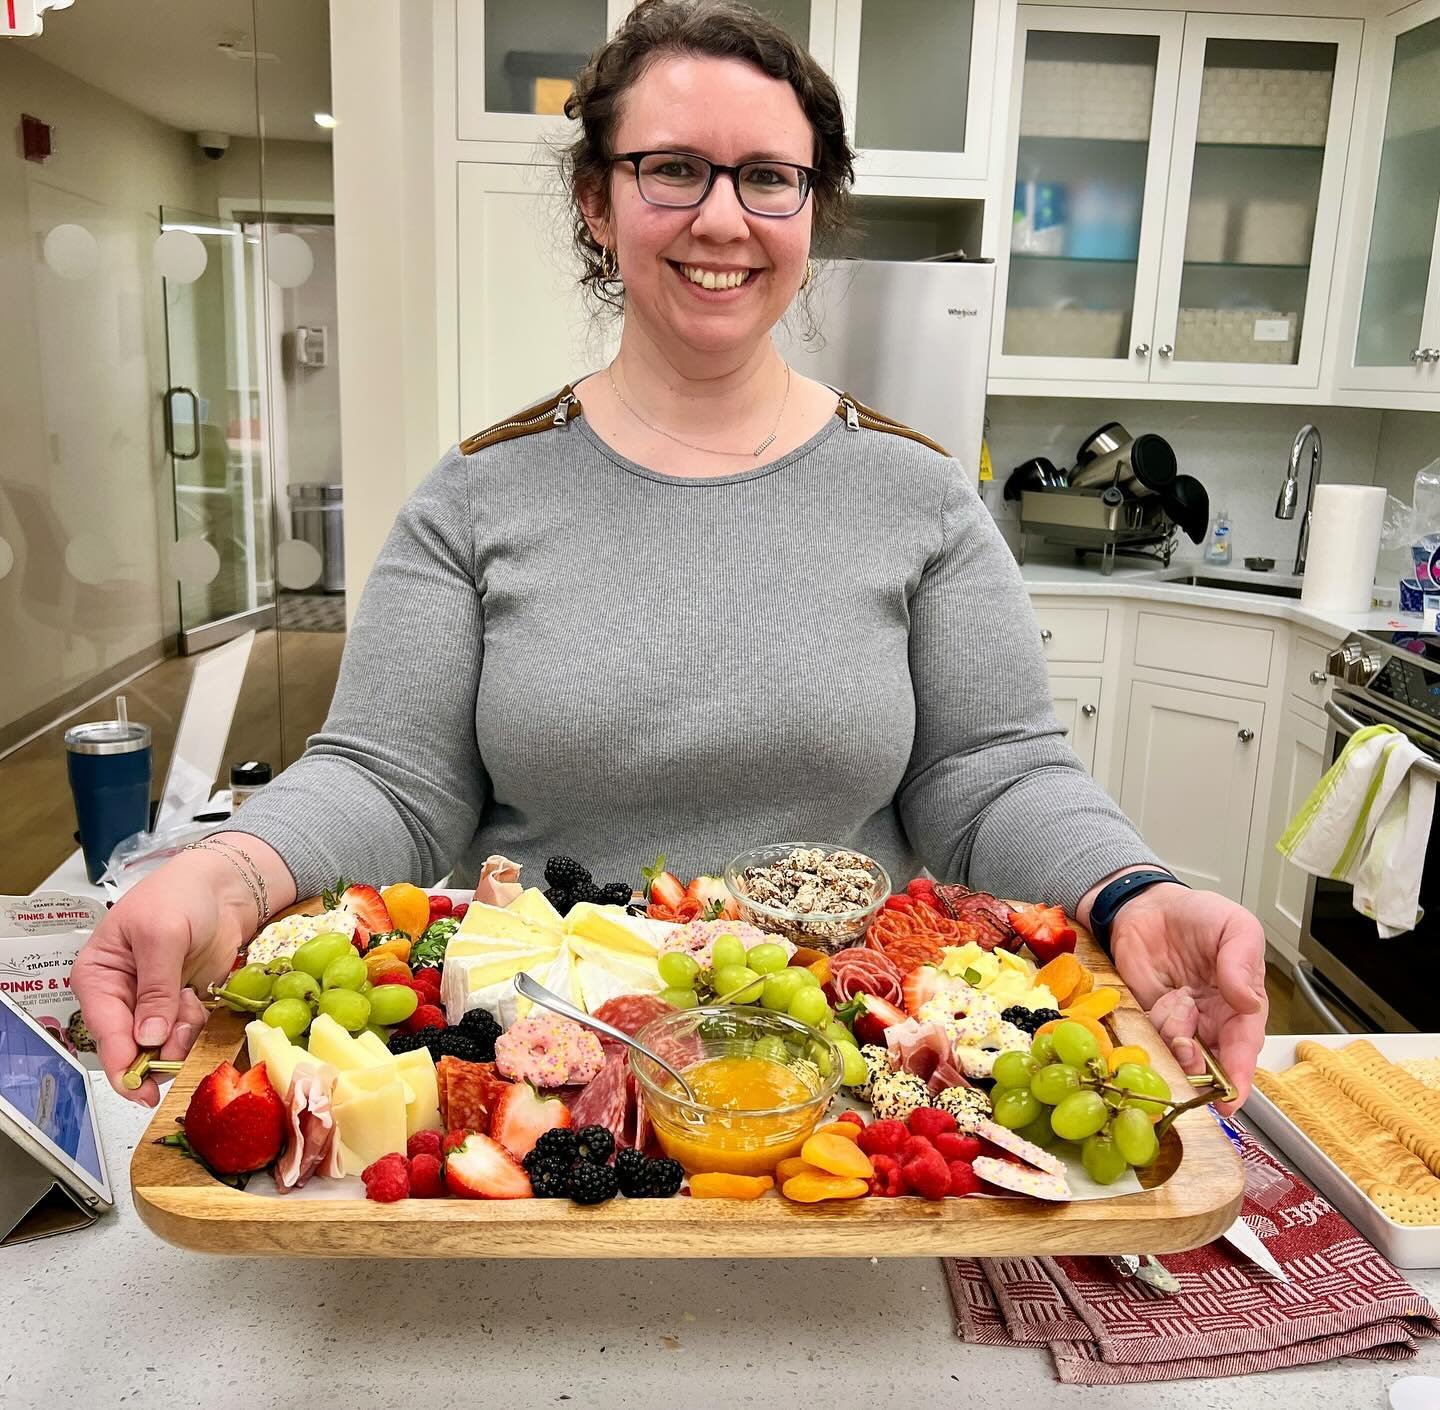 🧀 Currently Teaching Charcuterie Classes &hellip;
Last month I had the pleasure of teaching a charcuterie workshop for @tuxedoparklibrary 📚

I taught basic techniques including how to make a salami rose and river, the &ldquo;star&rdquo; cut fruit t